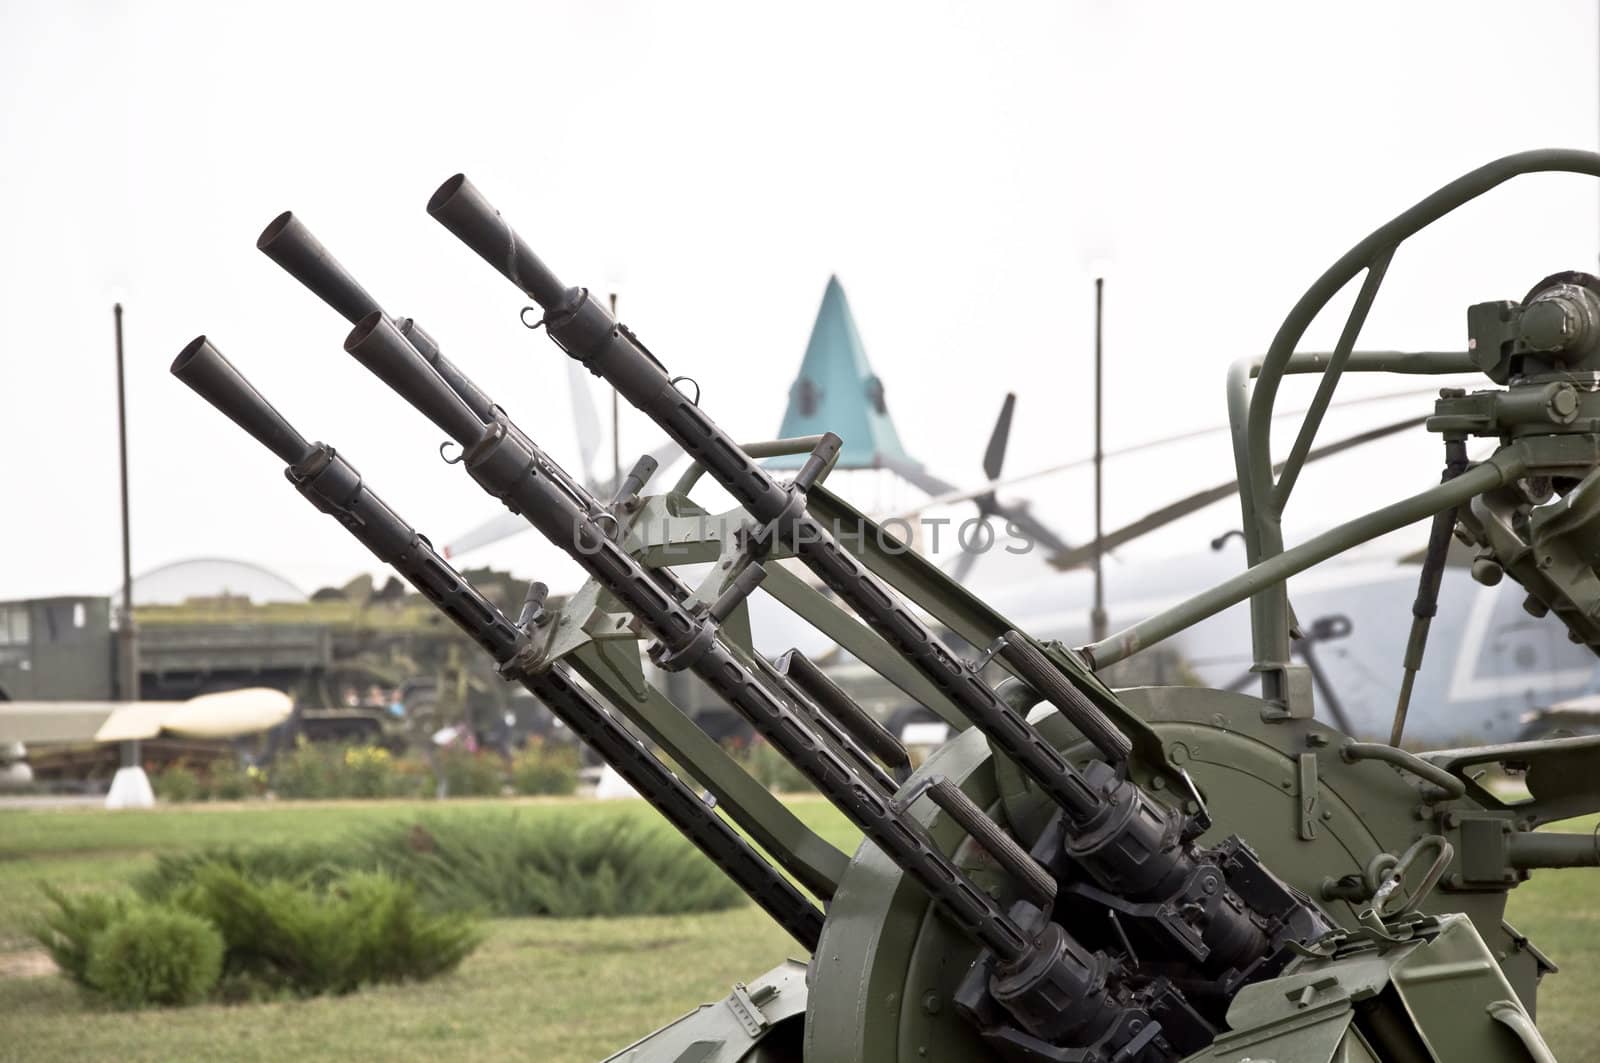 Trunks of anti-aircraft machine guns aimed at the sky. Small defensive weaponry.